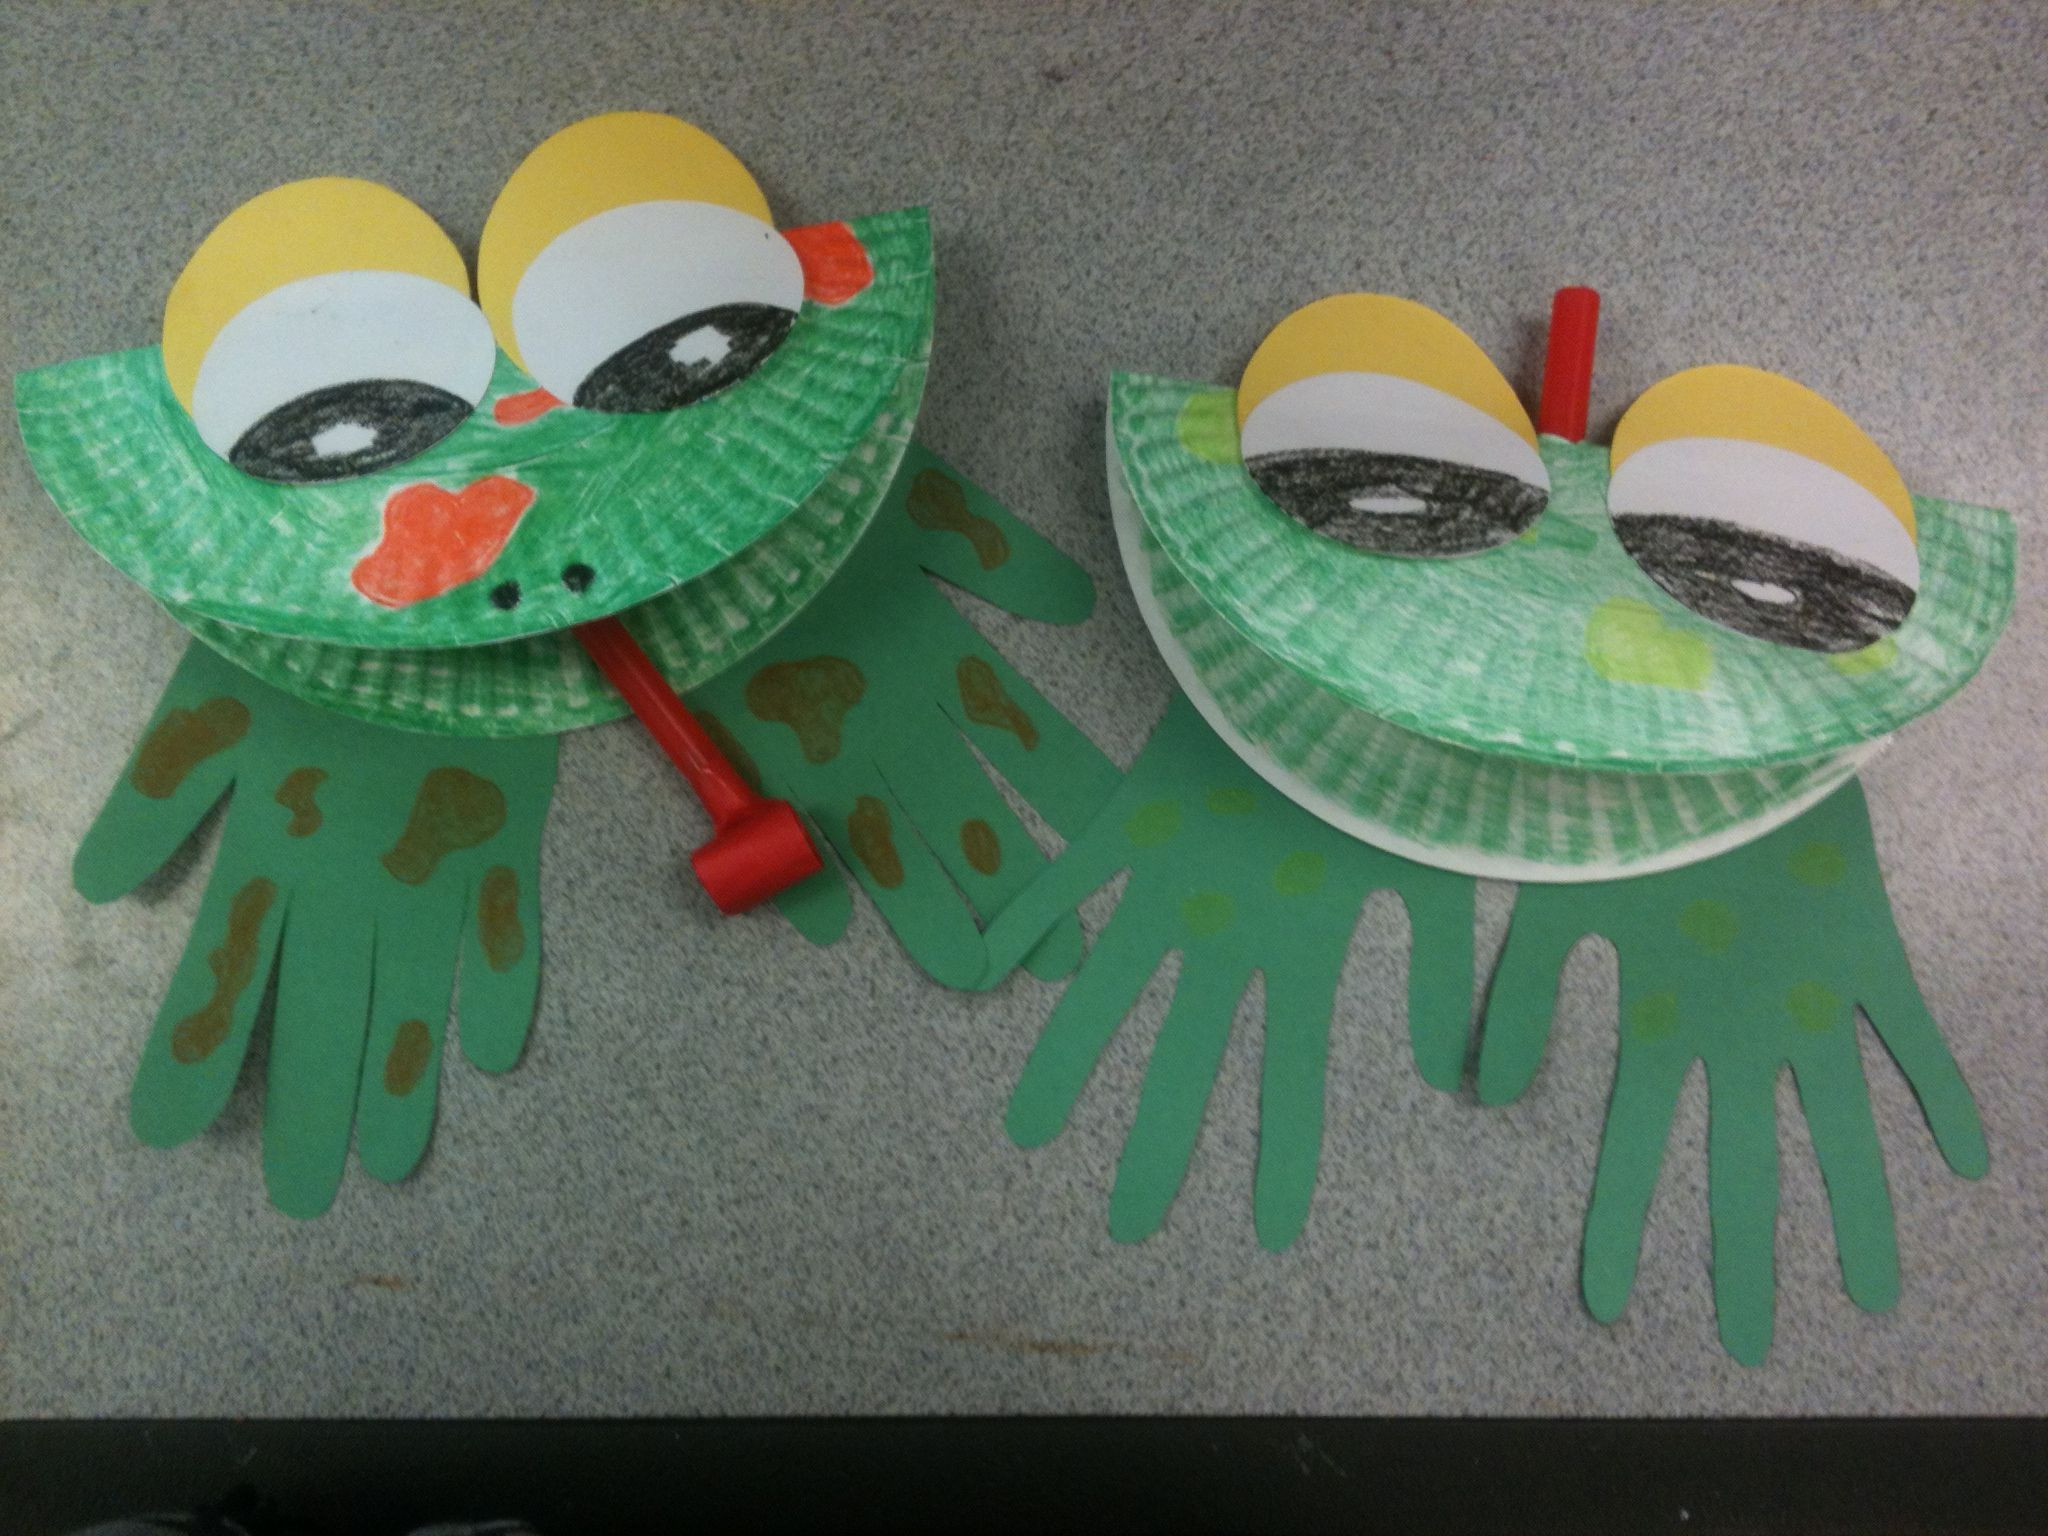 Frog Craft For Toddlers
 Best 25 Frog crafts ideas on Pinterest